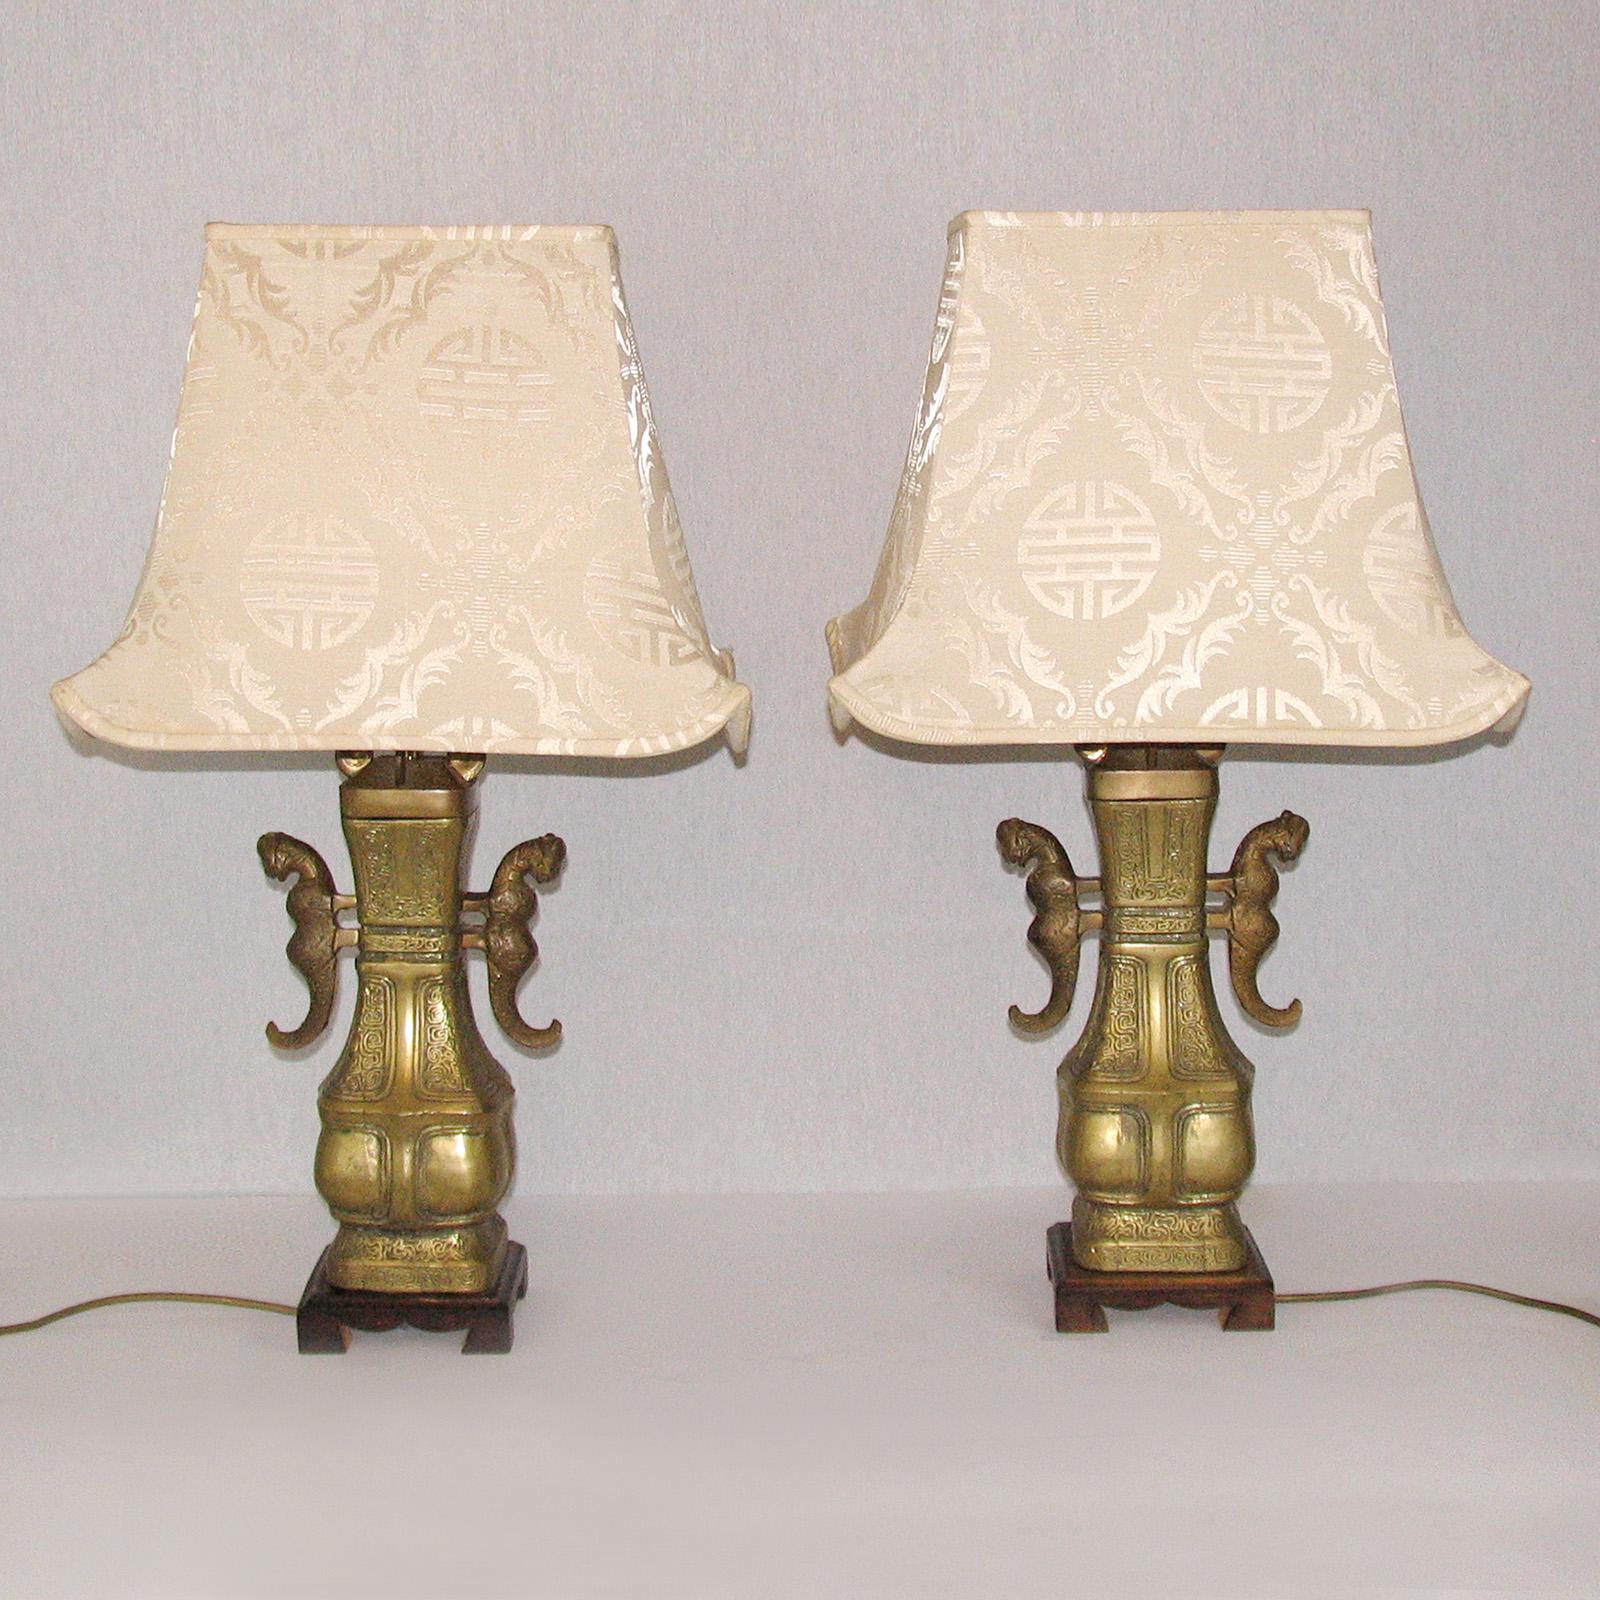 20th Century Bronze Chinese Table Lamps with Silk Pagoda Shades For Sale